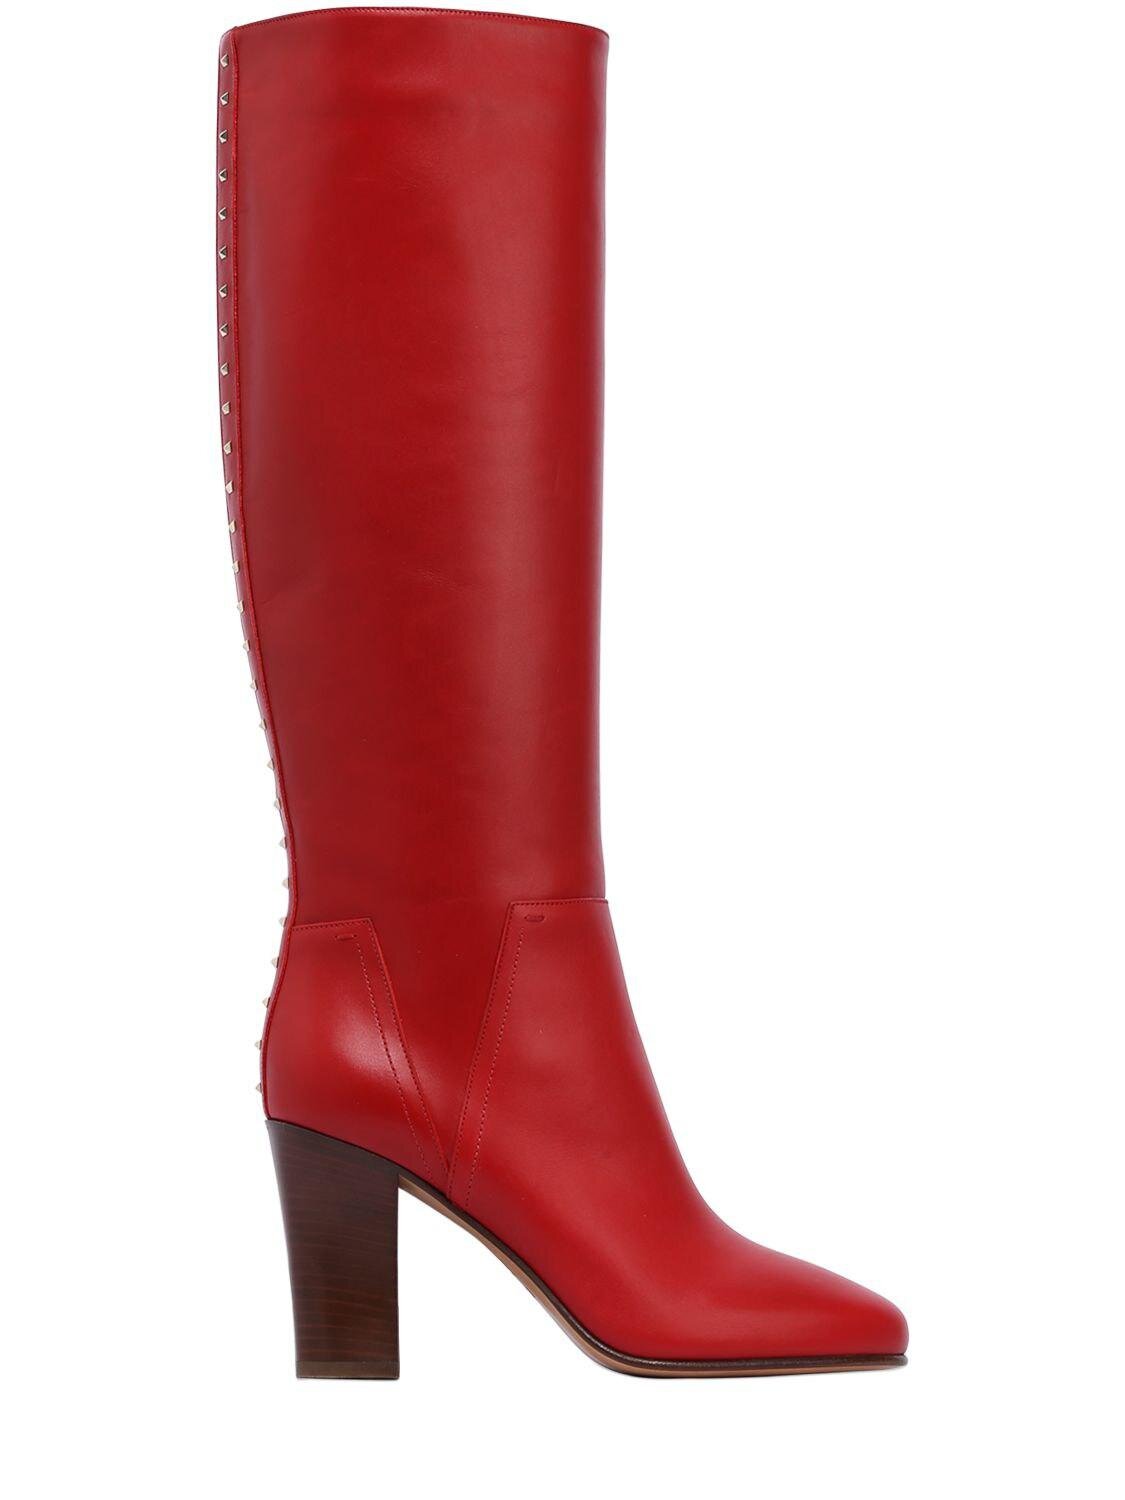 Valentino Lovestud Knee-High Boots in Red Leather.jpg